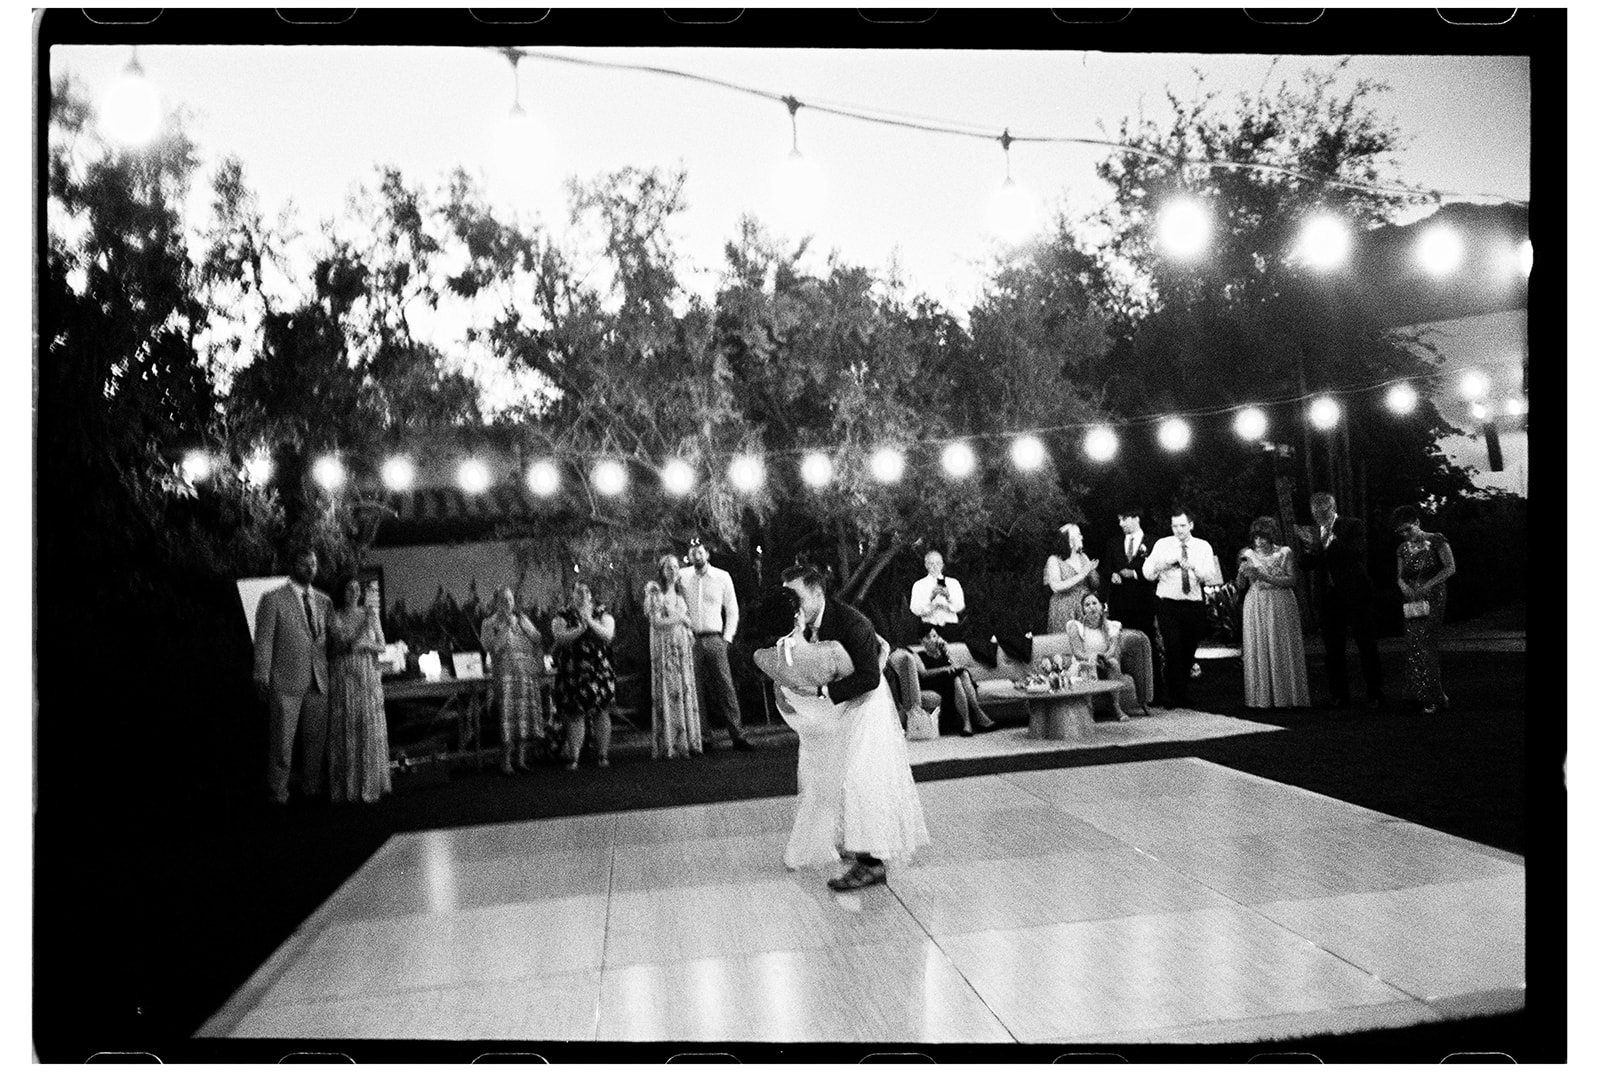 A bride and groom share a dance on an outdoor dance floor at a garden reception under string lights, with guests watching.